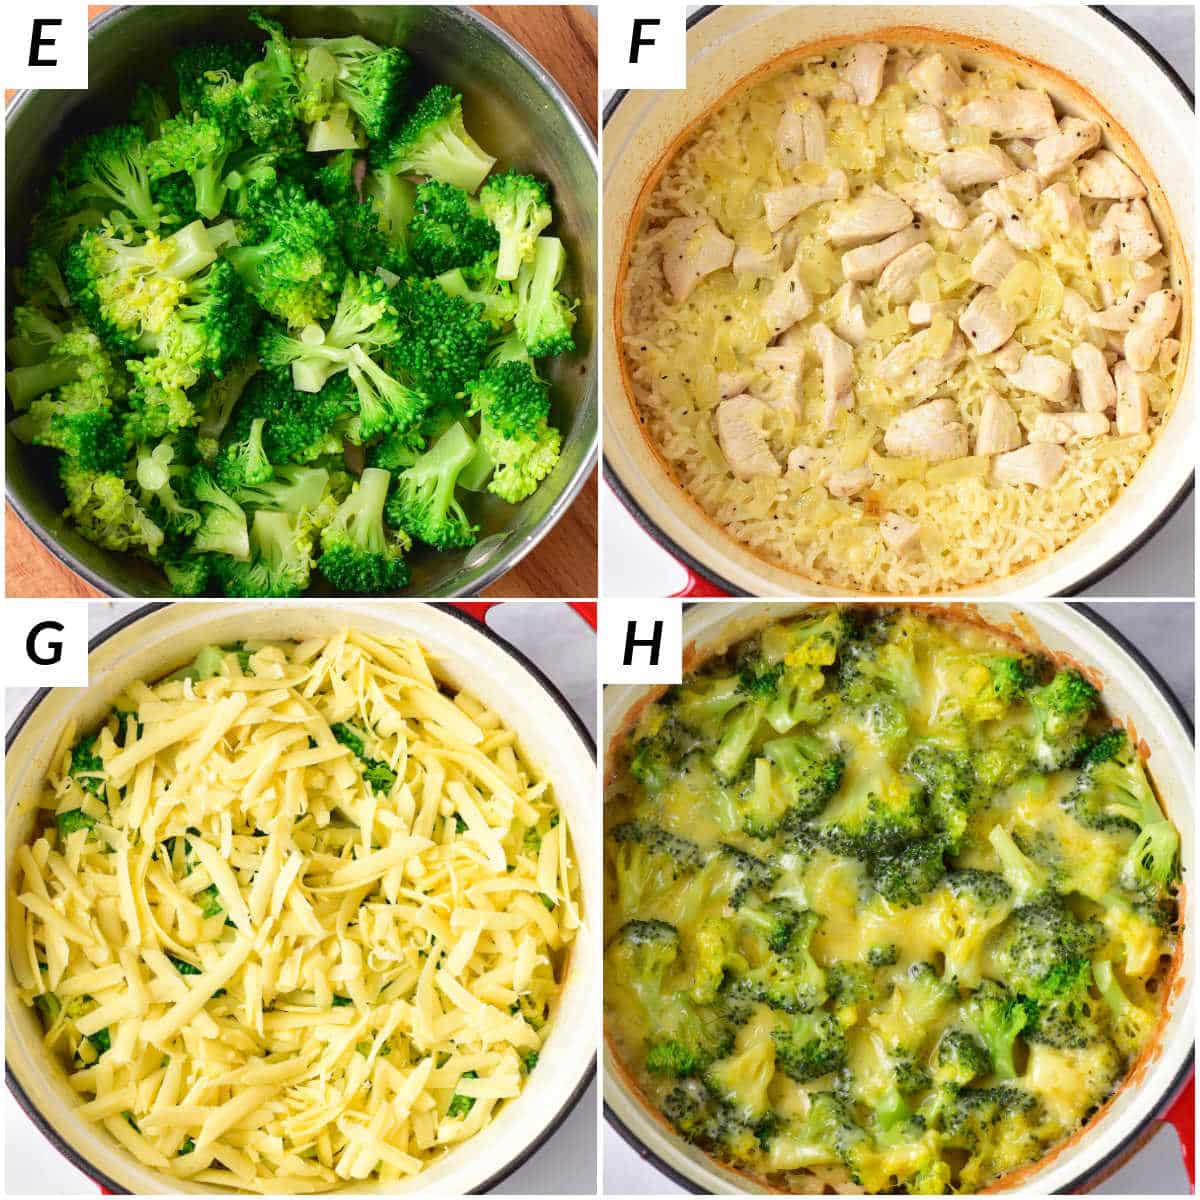 image collage showing the final steps for making chicken casserole